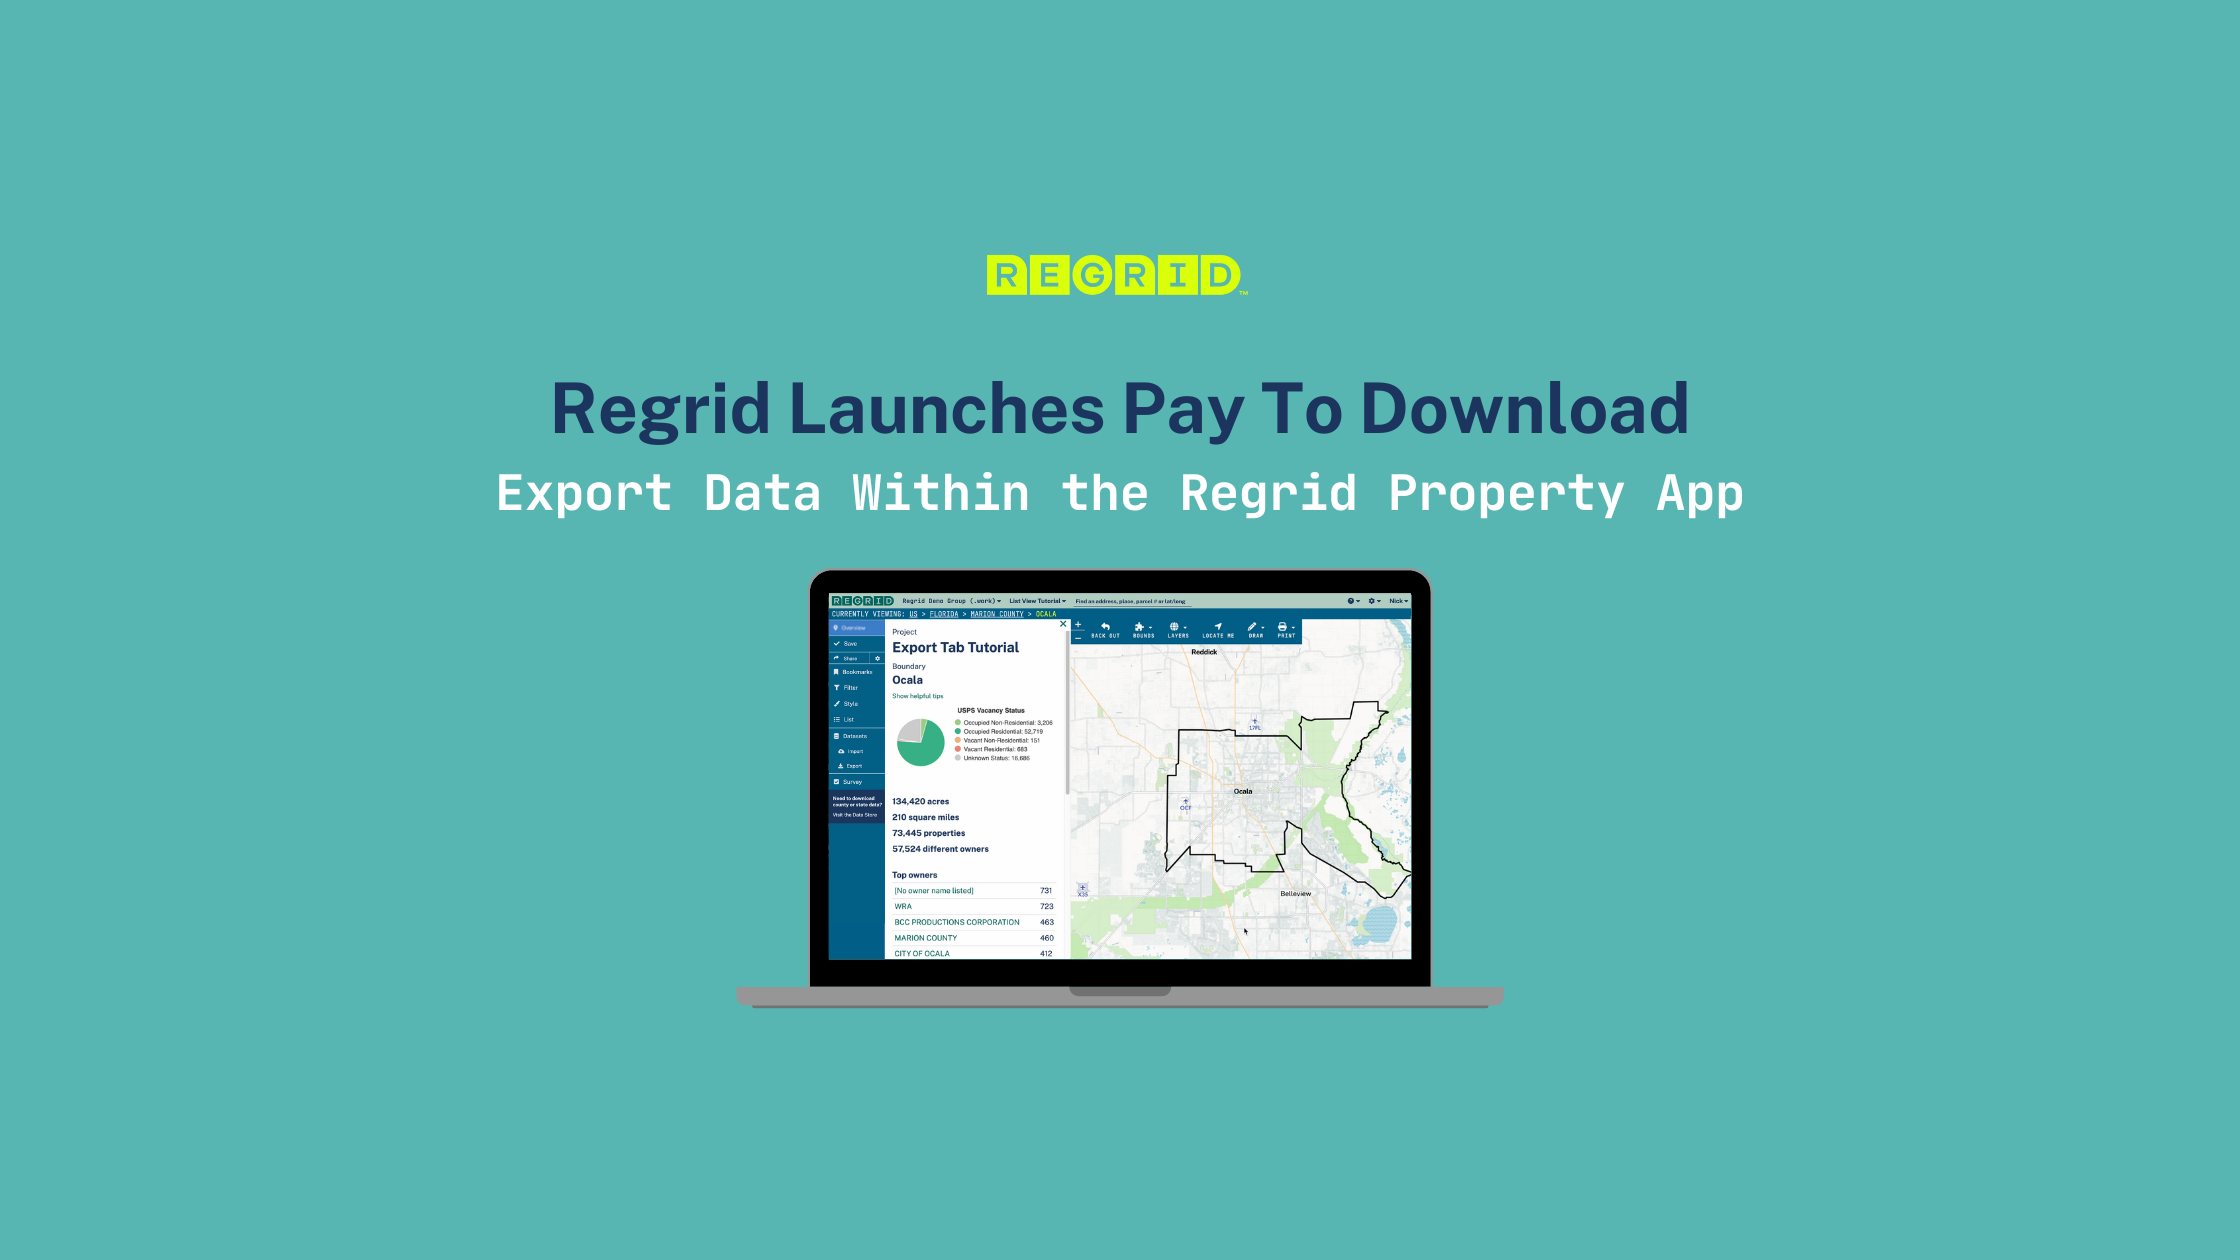 Regrid Launches Pay To Download